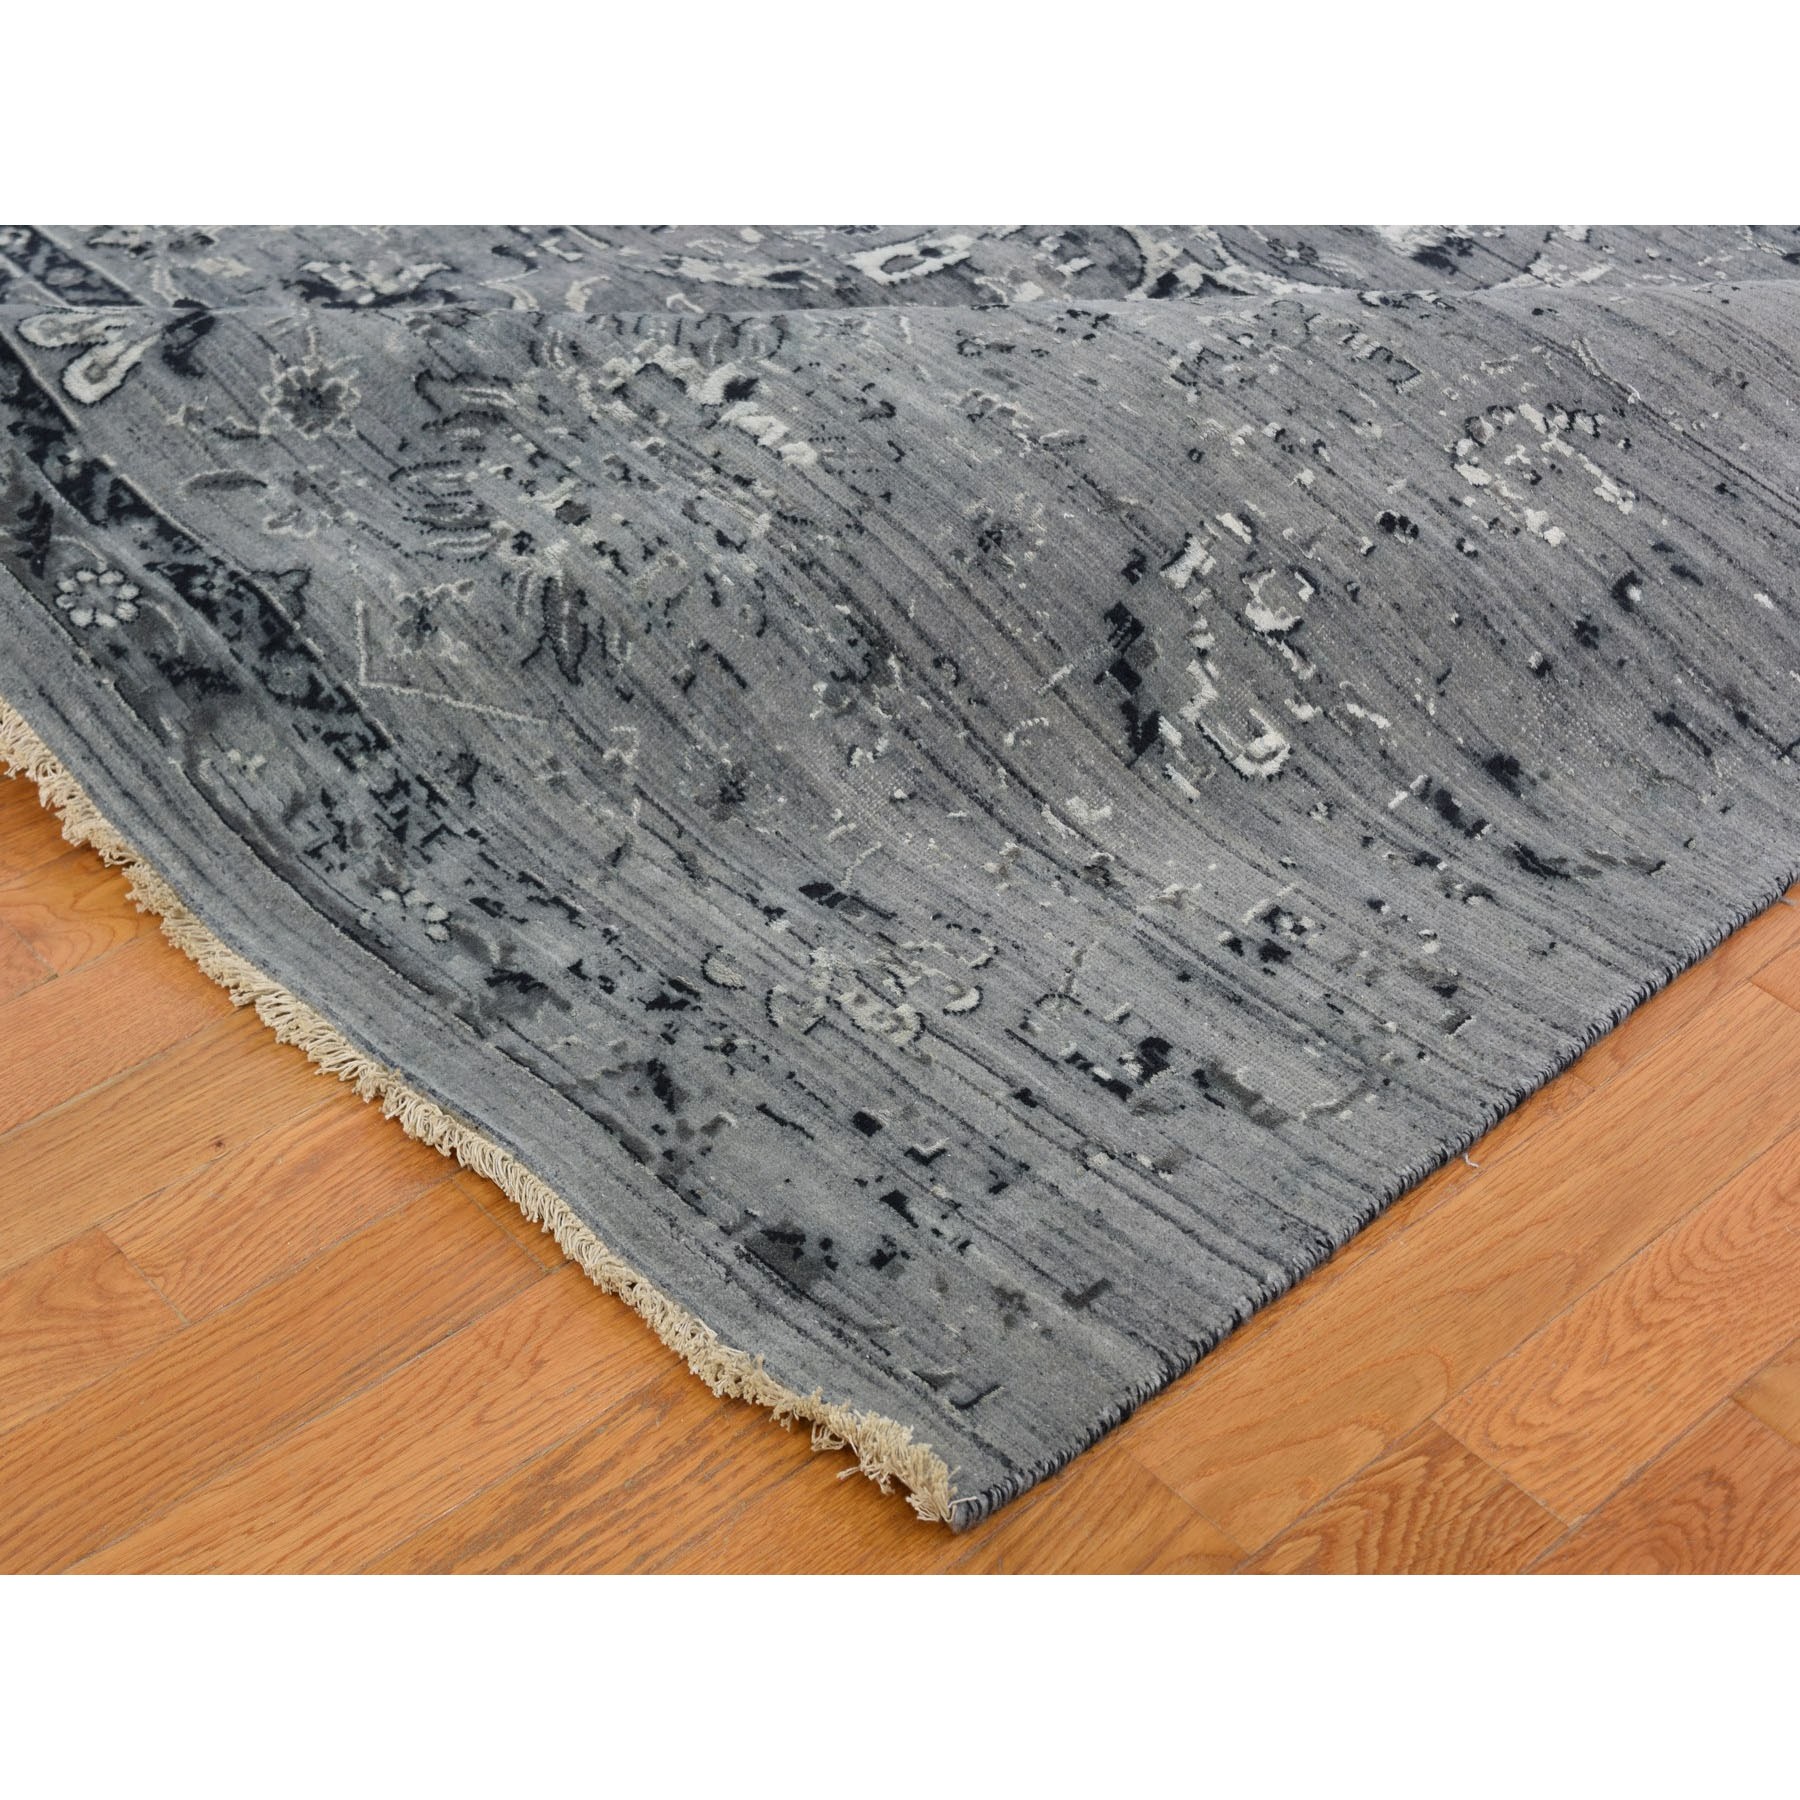 12-1 x17-8  Gray Oversized Broken Persian Erased Design Silk With Textured Wool Hand Knotted Oriental Rug 